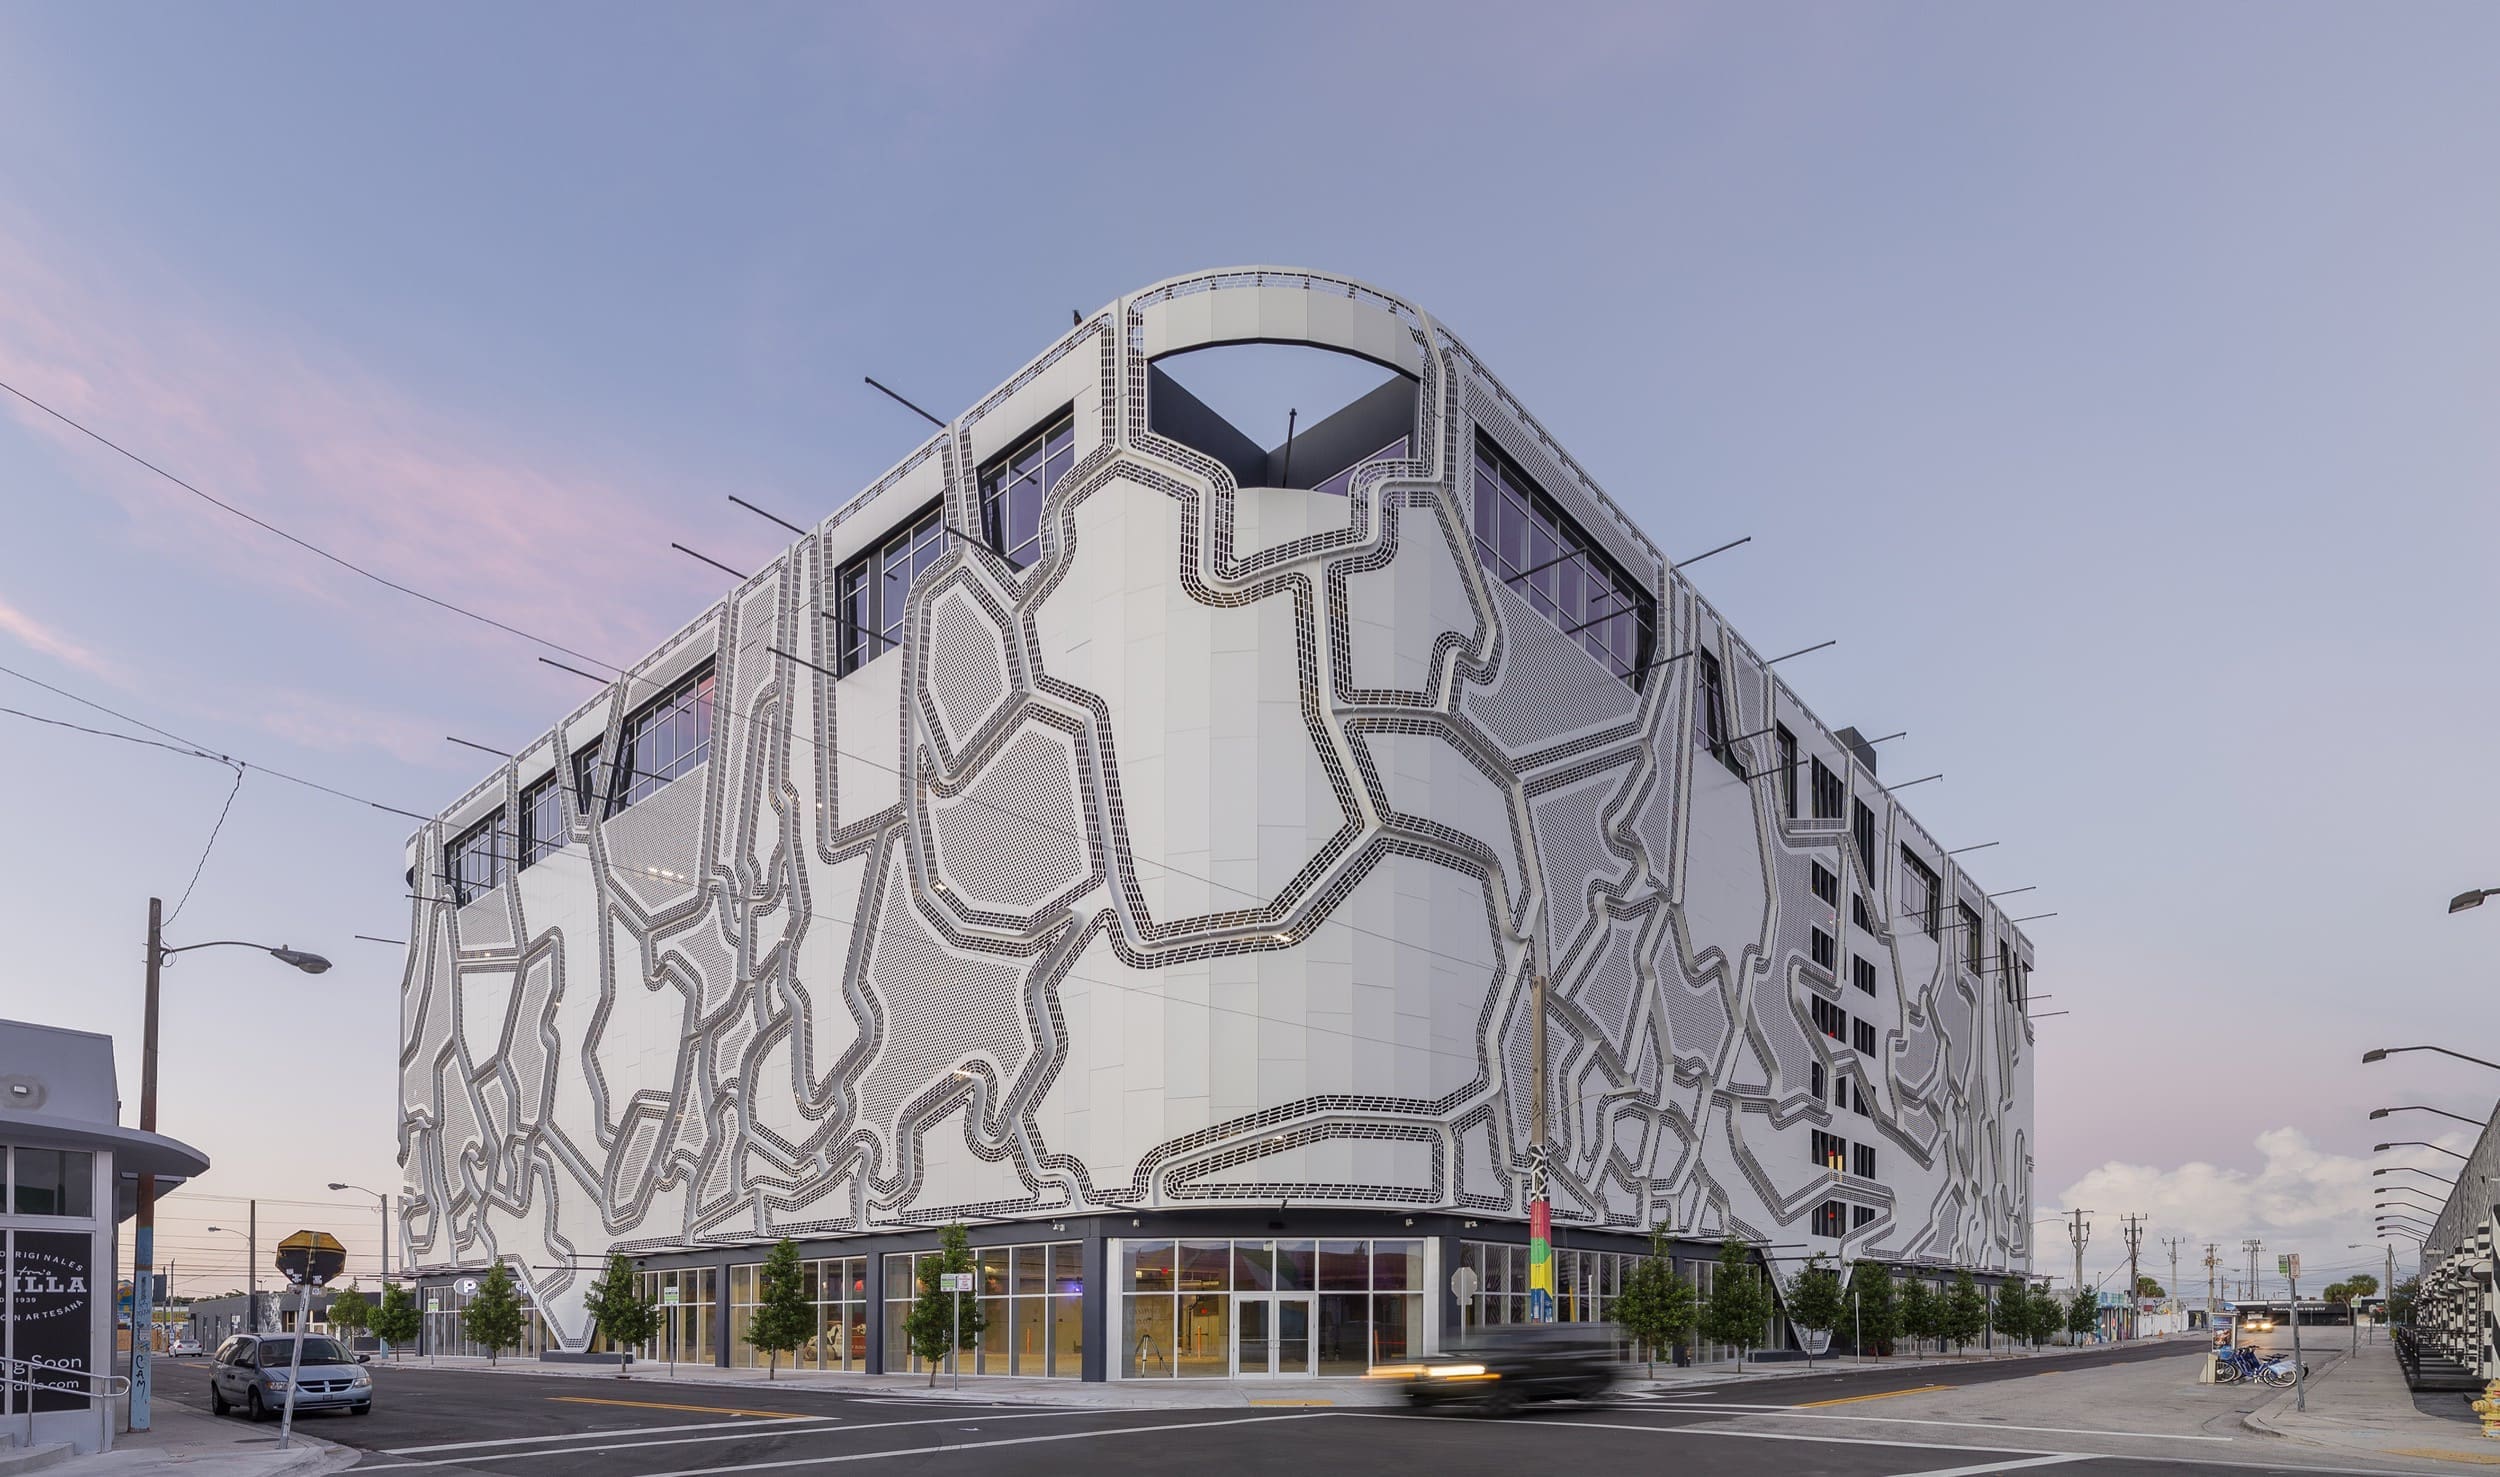 The Wynwood Garage features a painted aluminum facade with perforated planes that create multiple sight-lines. The wall is also designed to allow for additional artwork to be hung on the facade.